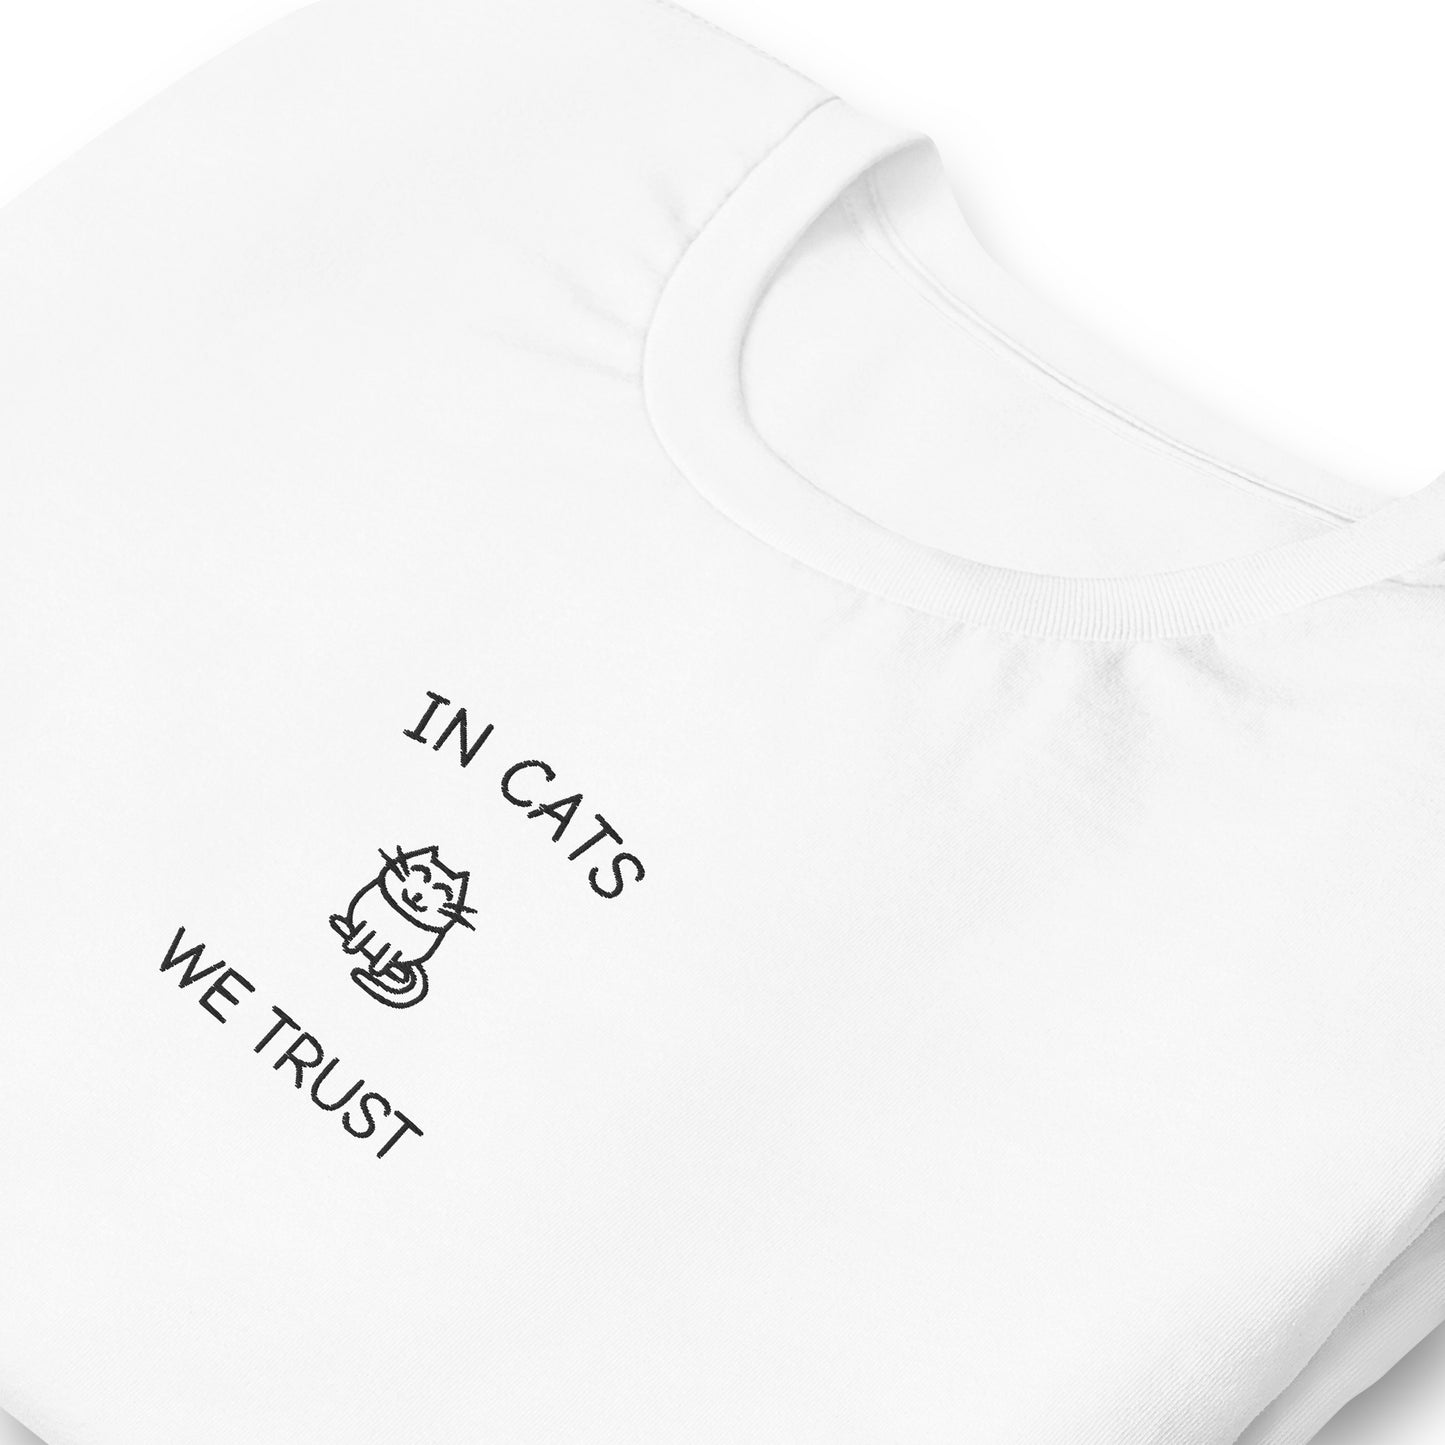 IN CATS WE TRUST - embroidered T-shirt